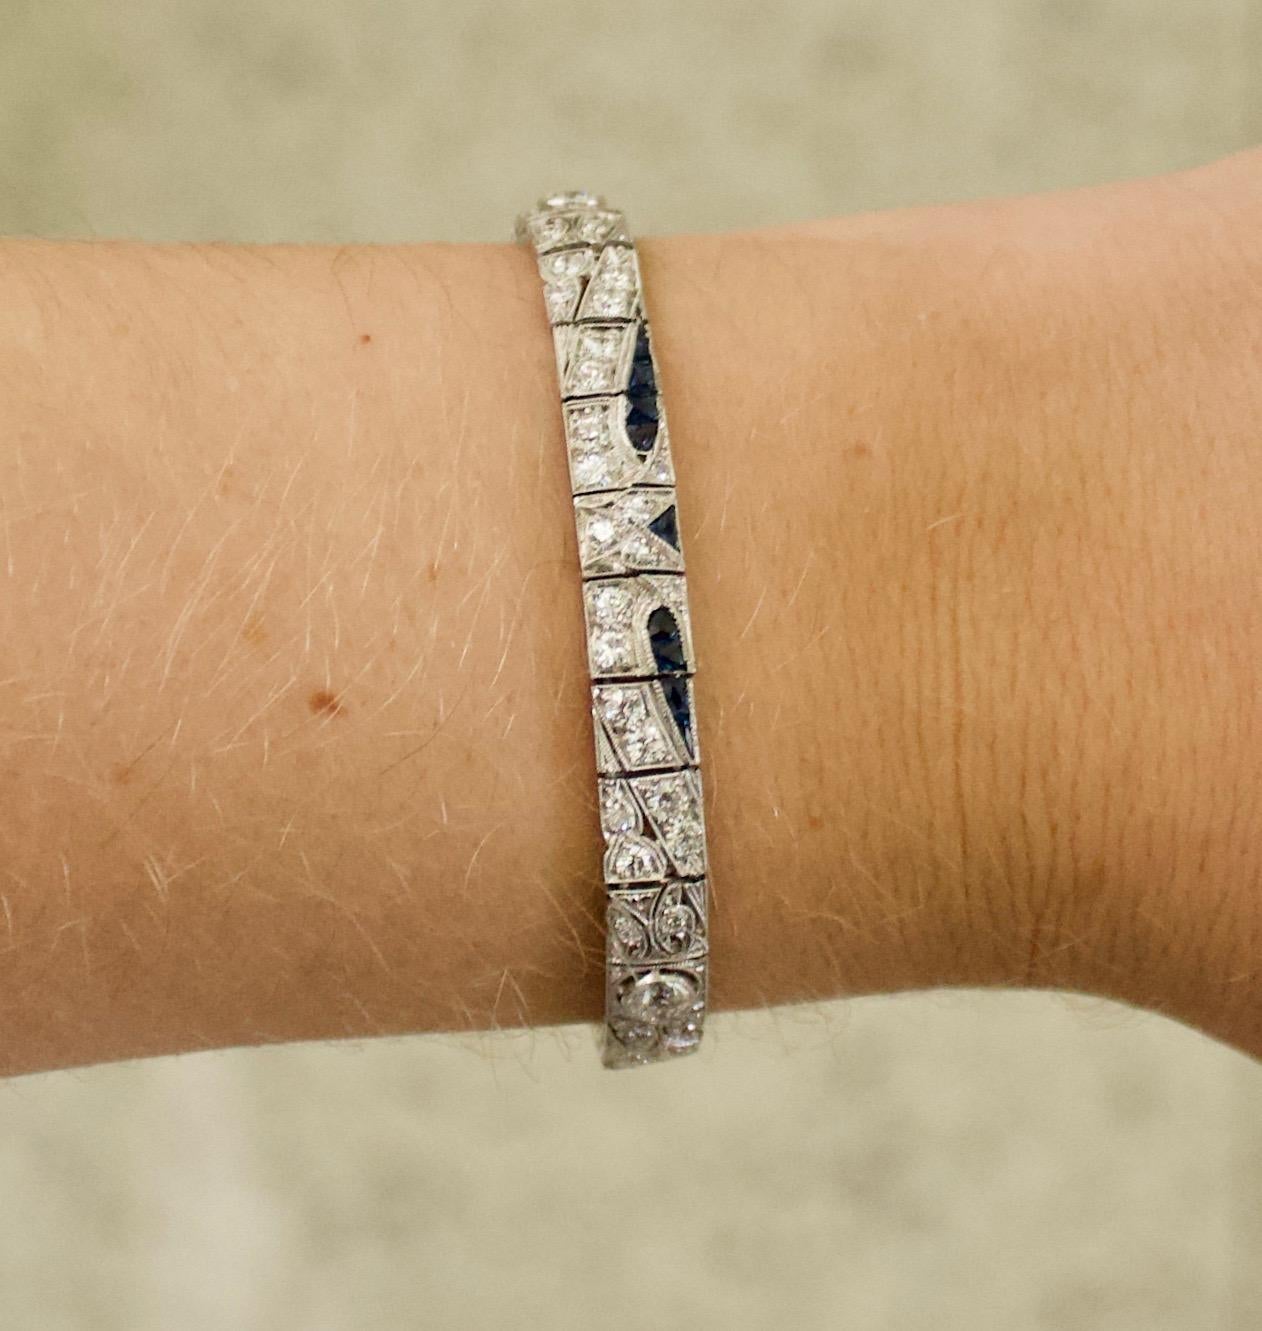 Art Deco Diamond and Sapphire Bracelet in Platinum Circa 1920's
Three Old European Cut Diamonds Weighing .90 Carats Approximately 
Seventy Eight Old European Cut Diamonds Weighing 3.15 Carats Approximately 
Twenty Seven fancy cut Sapphires  Weighing